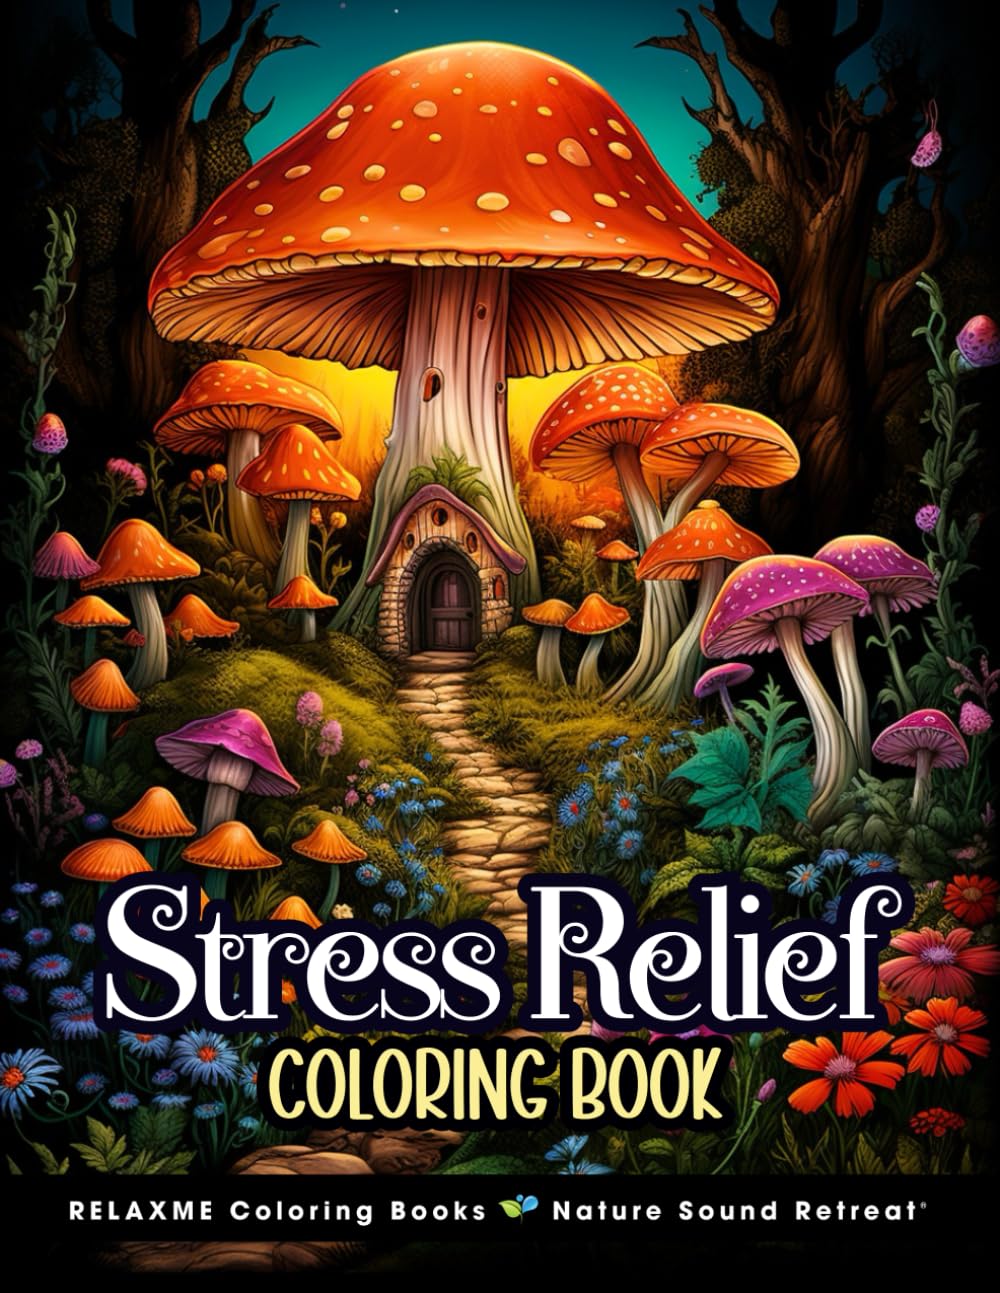 Stress Relief Adult Coloring Book: With Animals, Patterns, Landscapes, Flowers, Mushrooms, Fairies for Relaxation